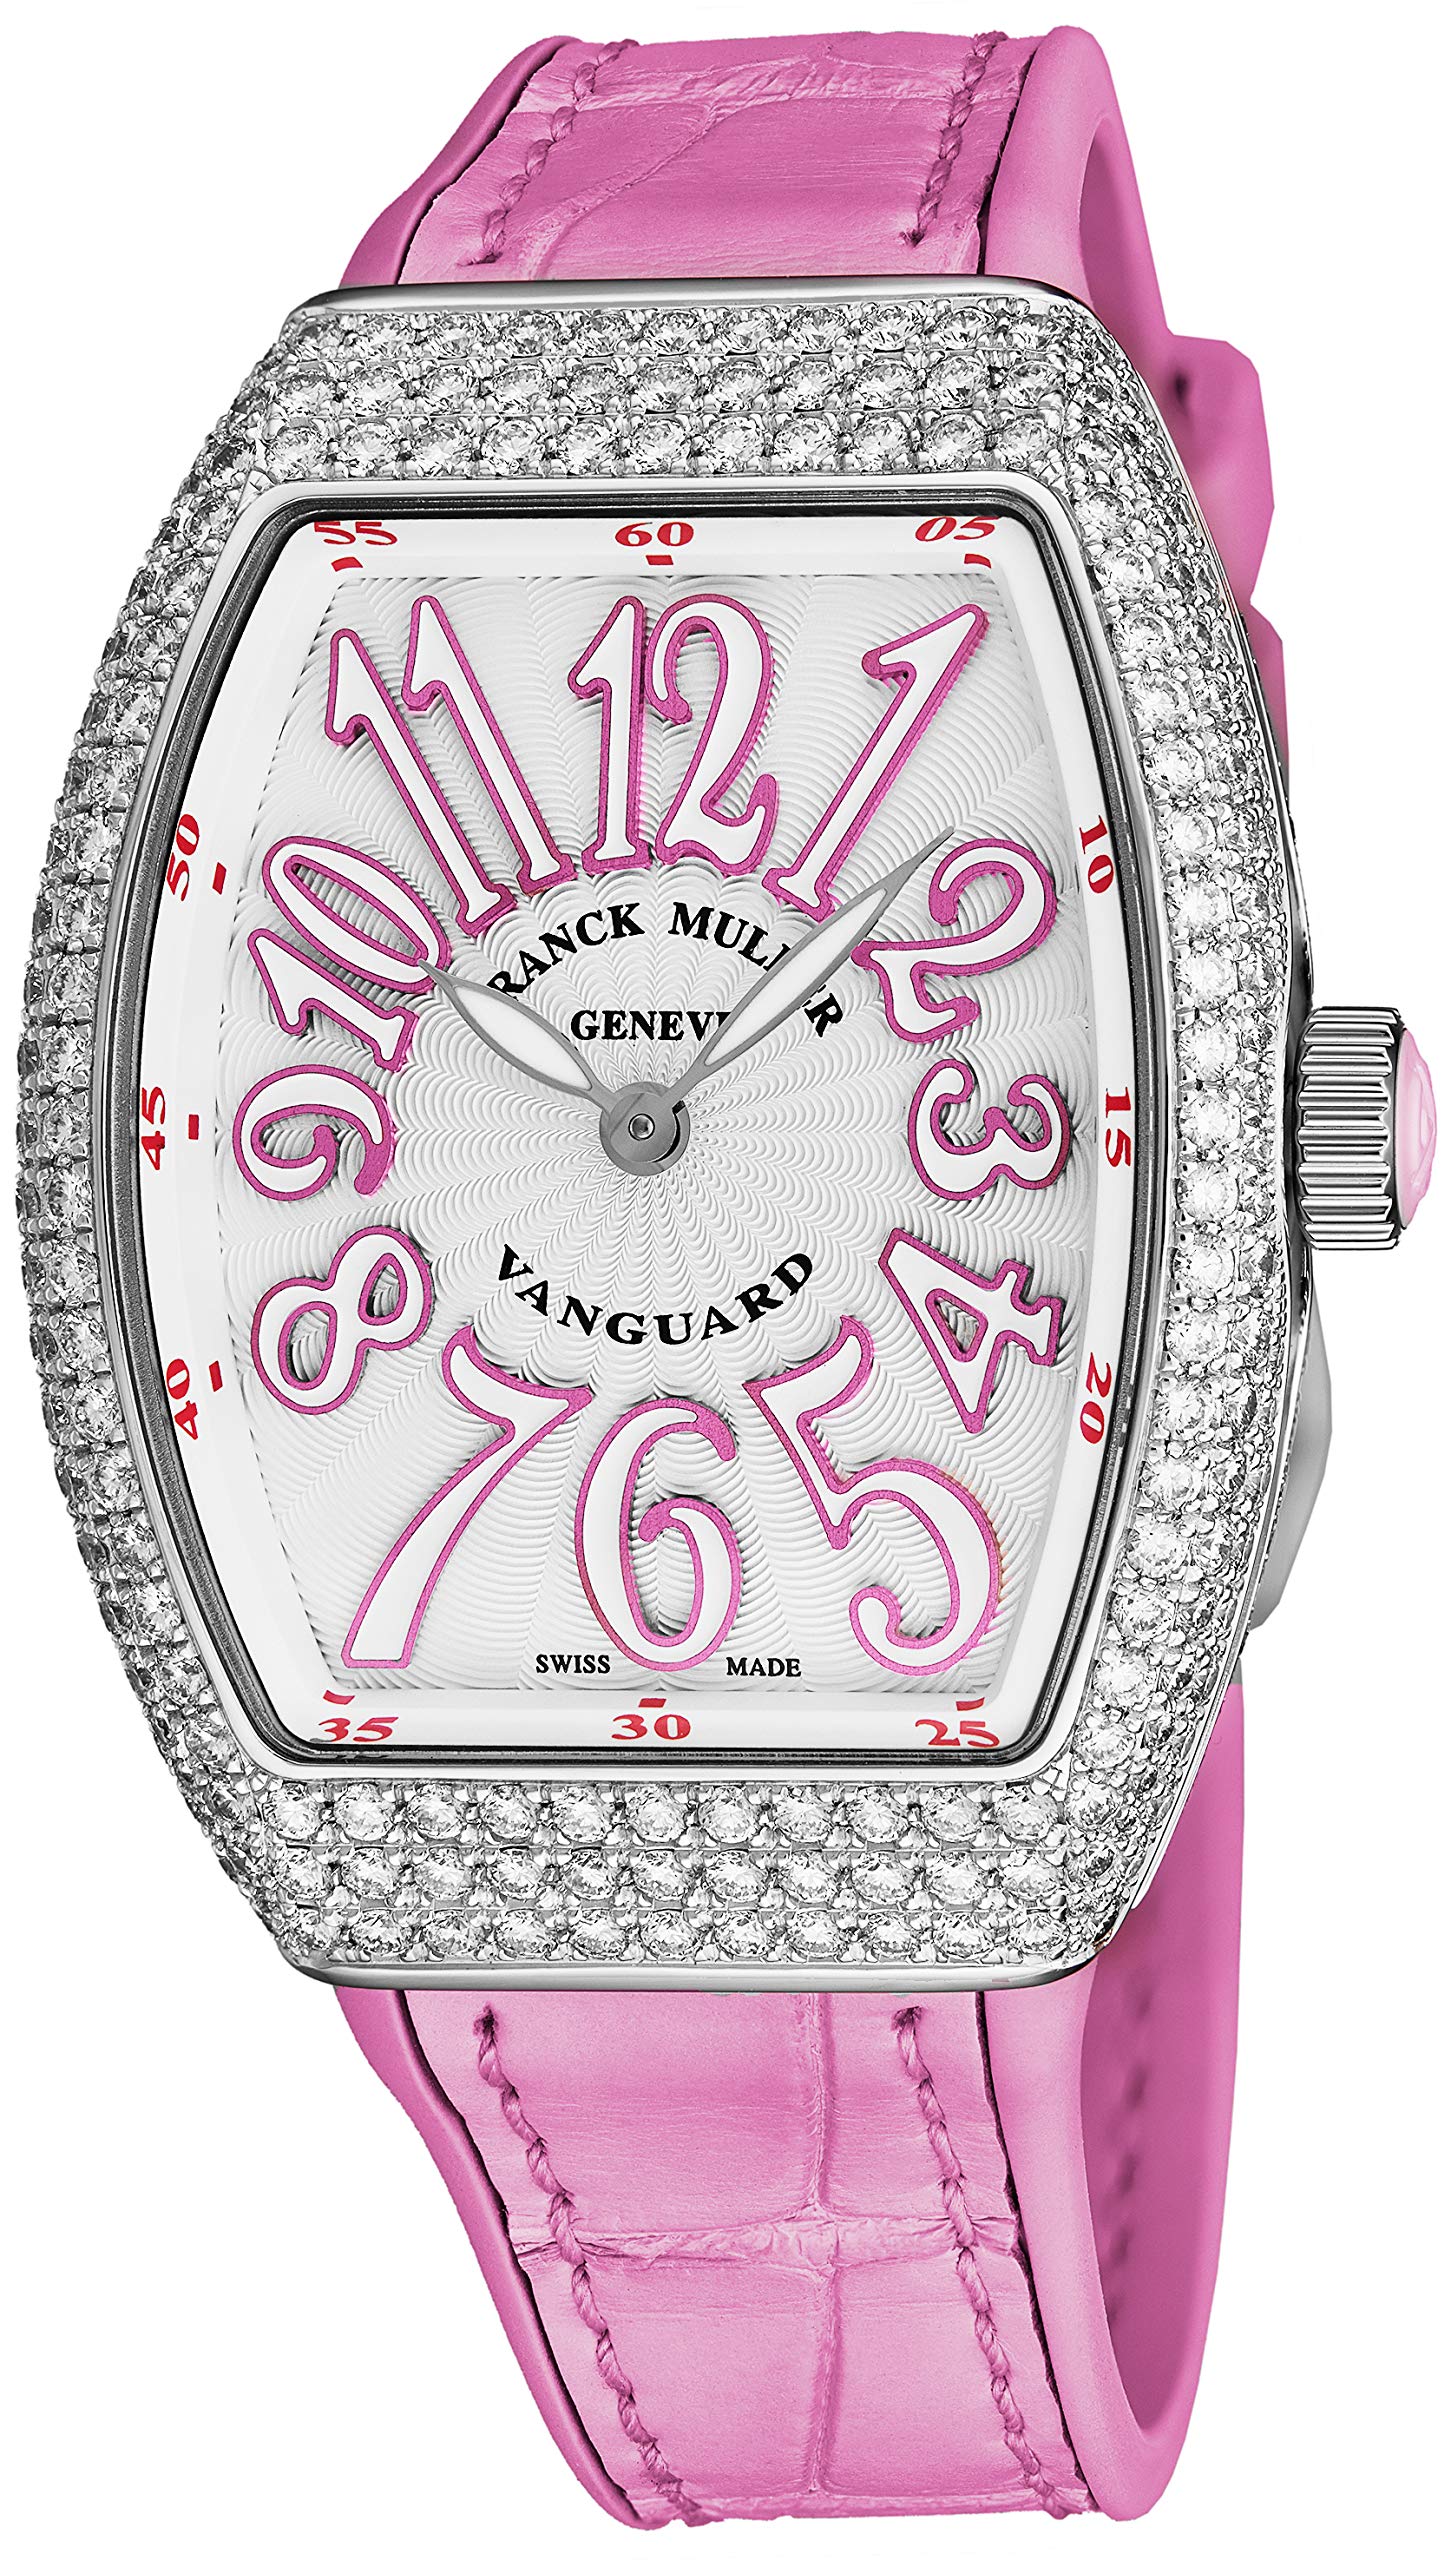 Franck Muller Vanguard Diamond Womens Swiss Quartz Watch - Tonneau Silver Face with Luminous Hands and Sapphire Crystal - Pink Leather/Rubber Strap Ladies Watch V 32 SC at FO D